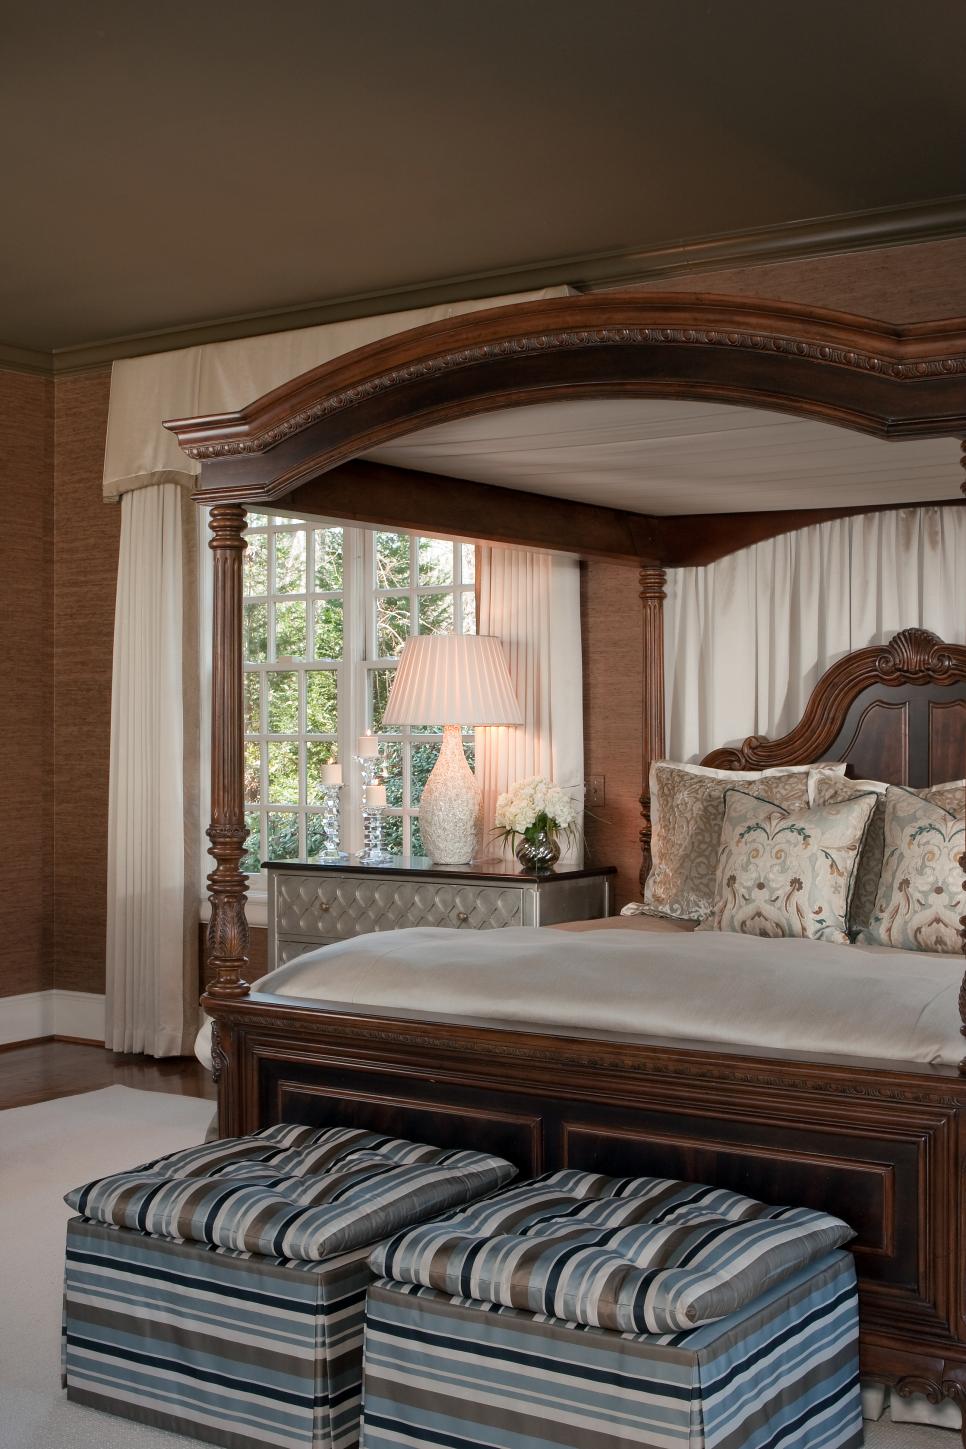 Transitional Master Bedroom With Canopy Bed and Striped